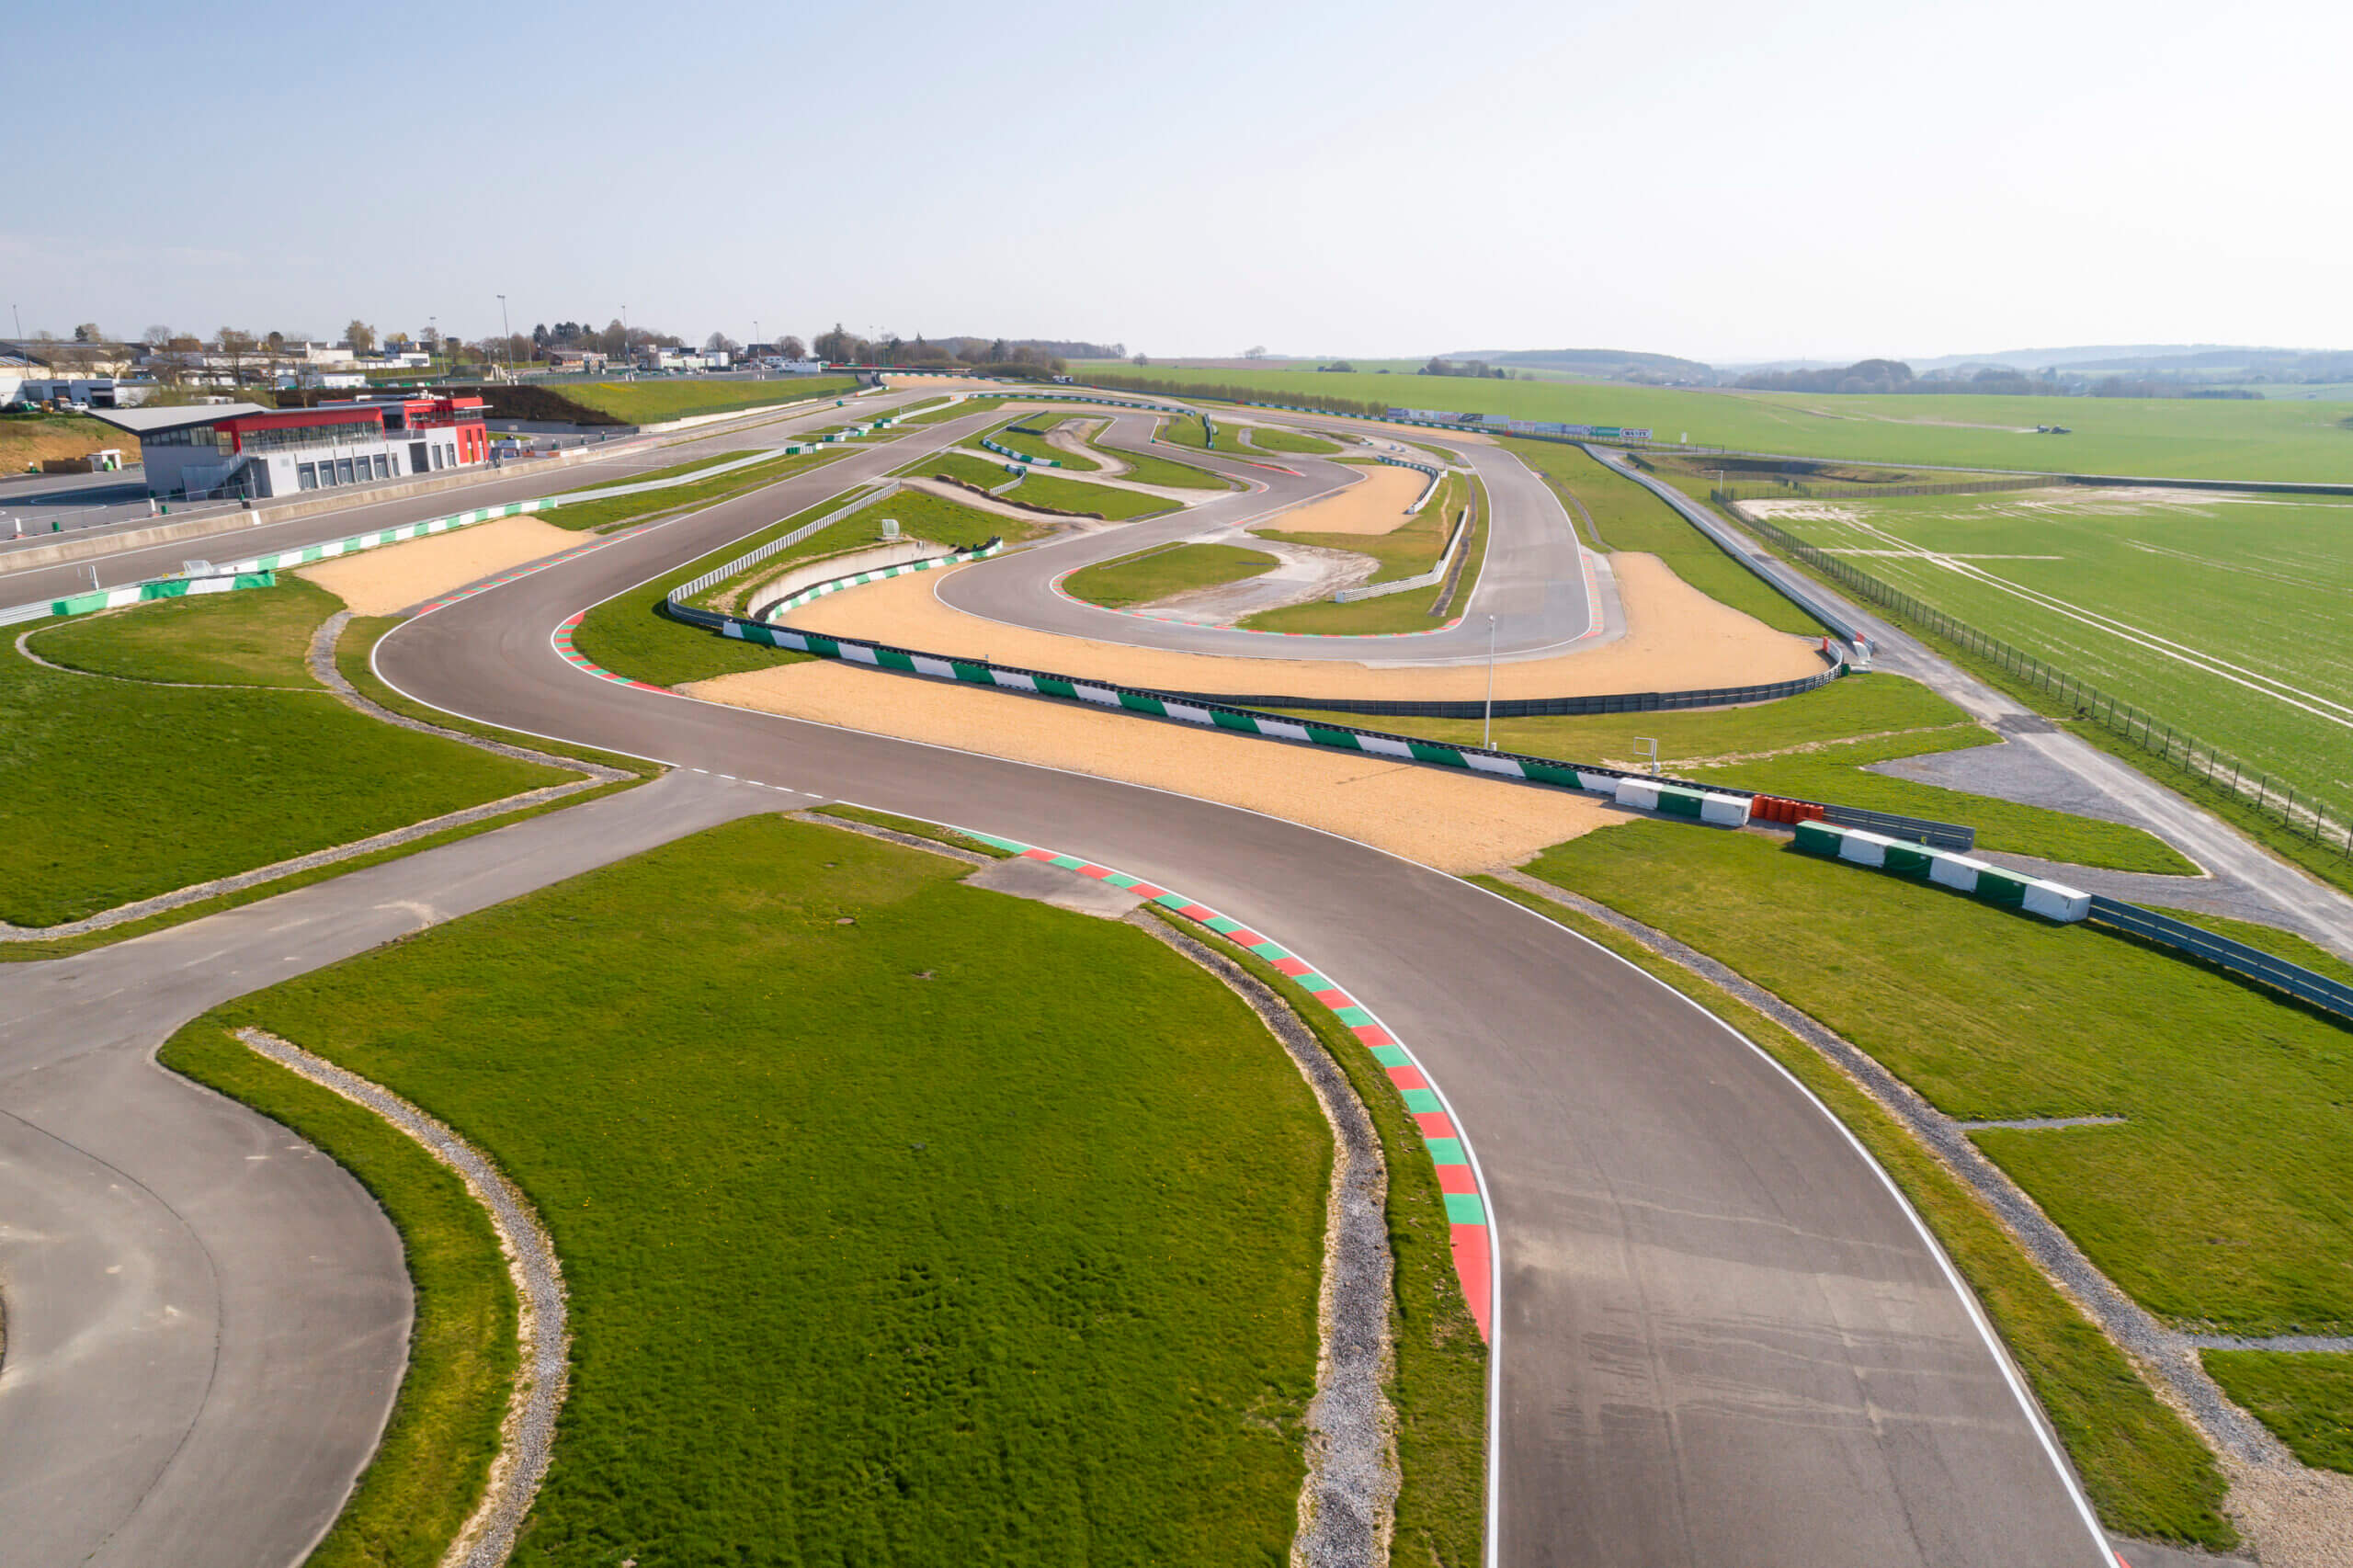 The circuit and its facilities all to yourself!